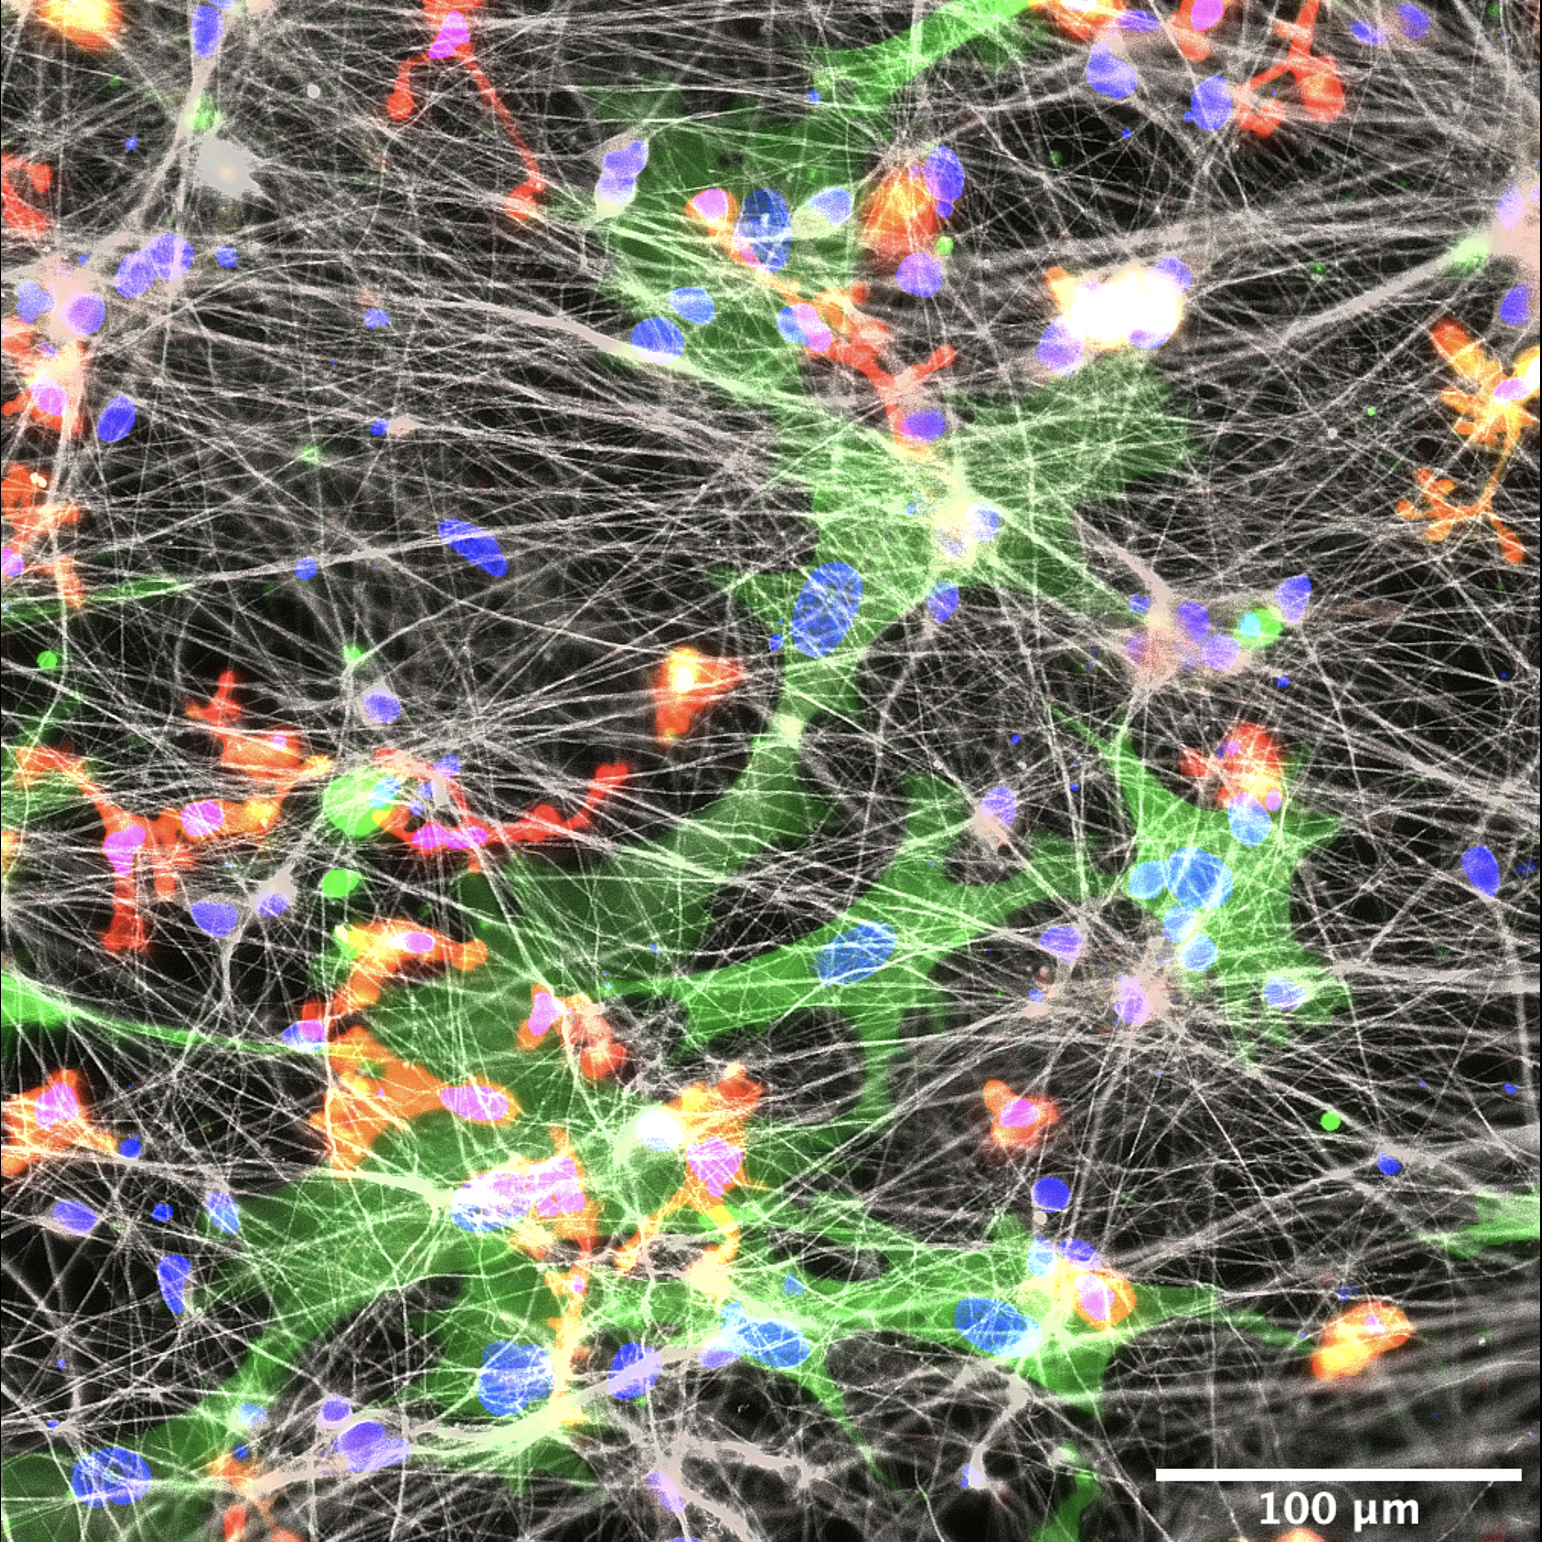 Close-up imaging of a web of multicolored neural connections, showing a measurement scale of about 400 micrometers across in its entirety.